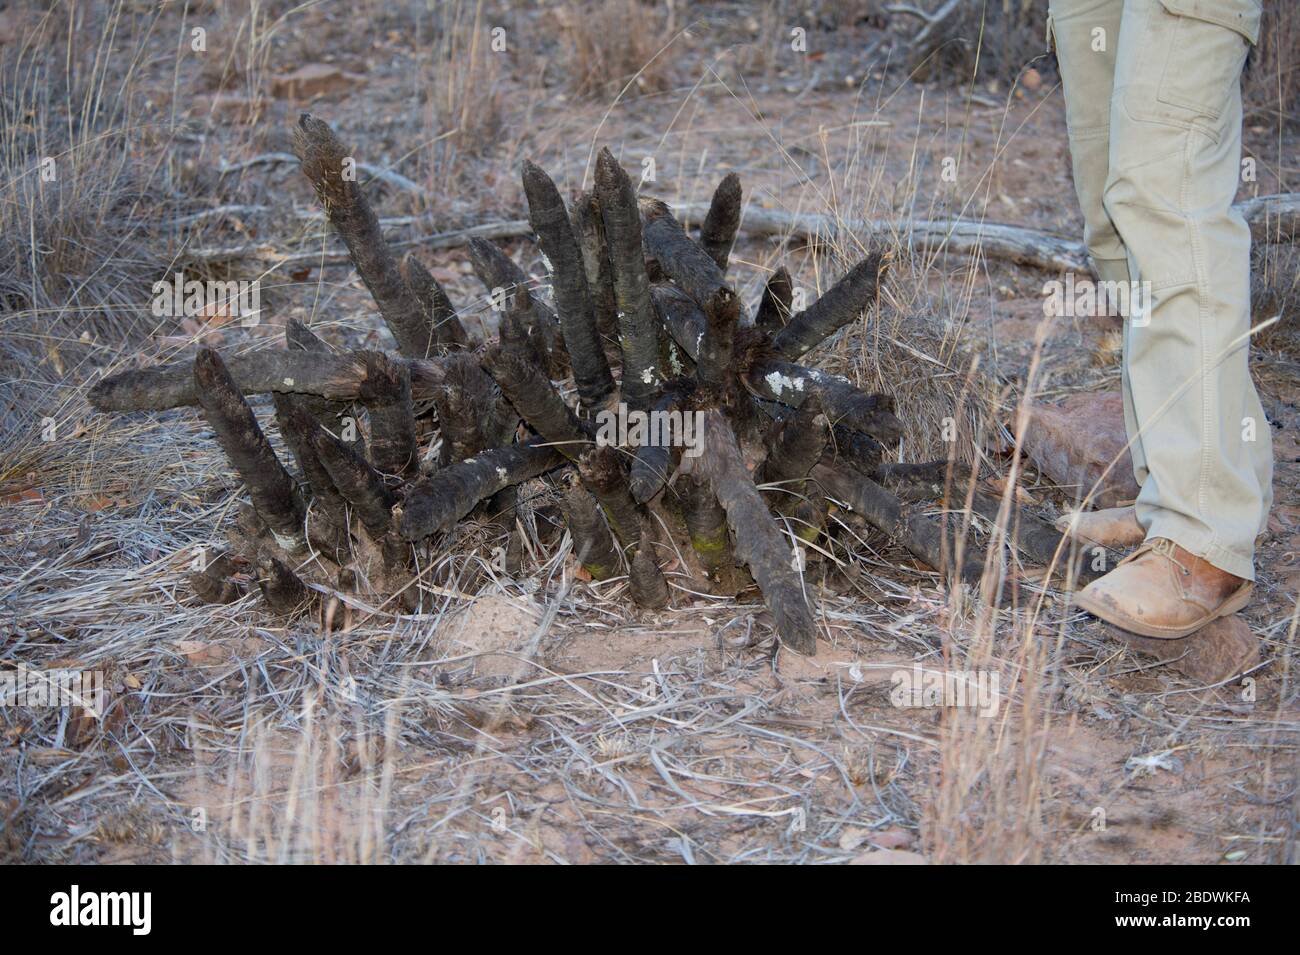 Baboon Tail plant, Xerophyta retinervis, charred by bushfire with ranger's legs, Ant's Hill Reserve, near Vaalwater, Limpopo province, South Africa Stock Photo